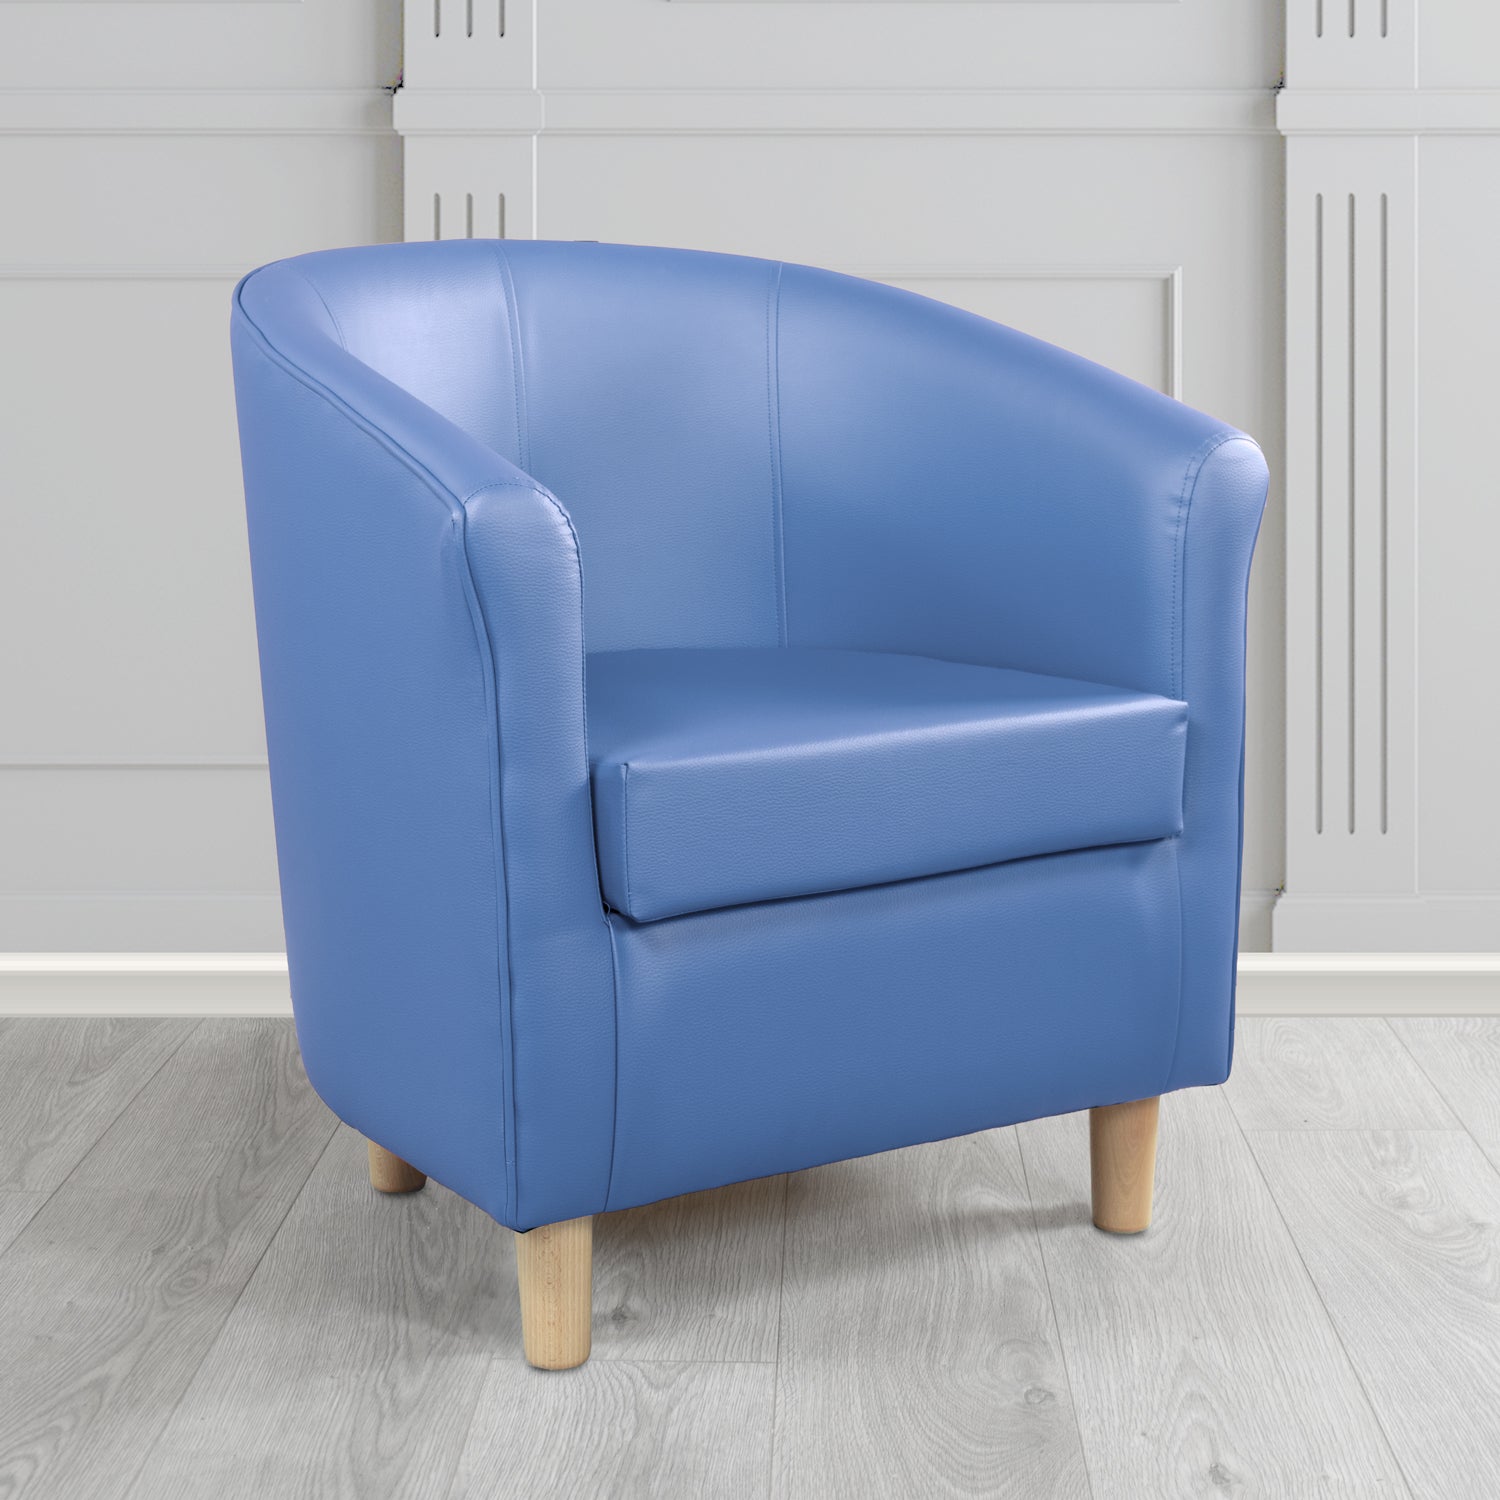 Tuscany Just Colour Blue Steel Antimicrobial Crib 5 Contract Faux Leather Tub Chair